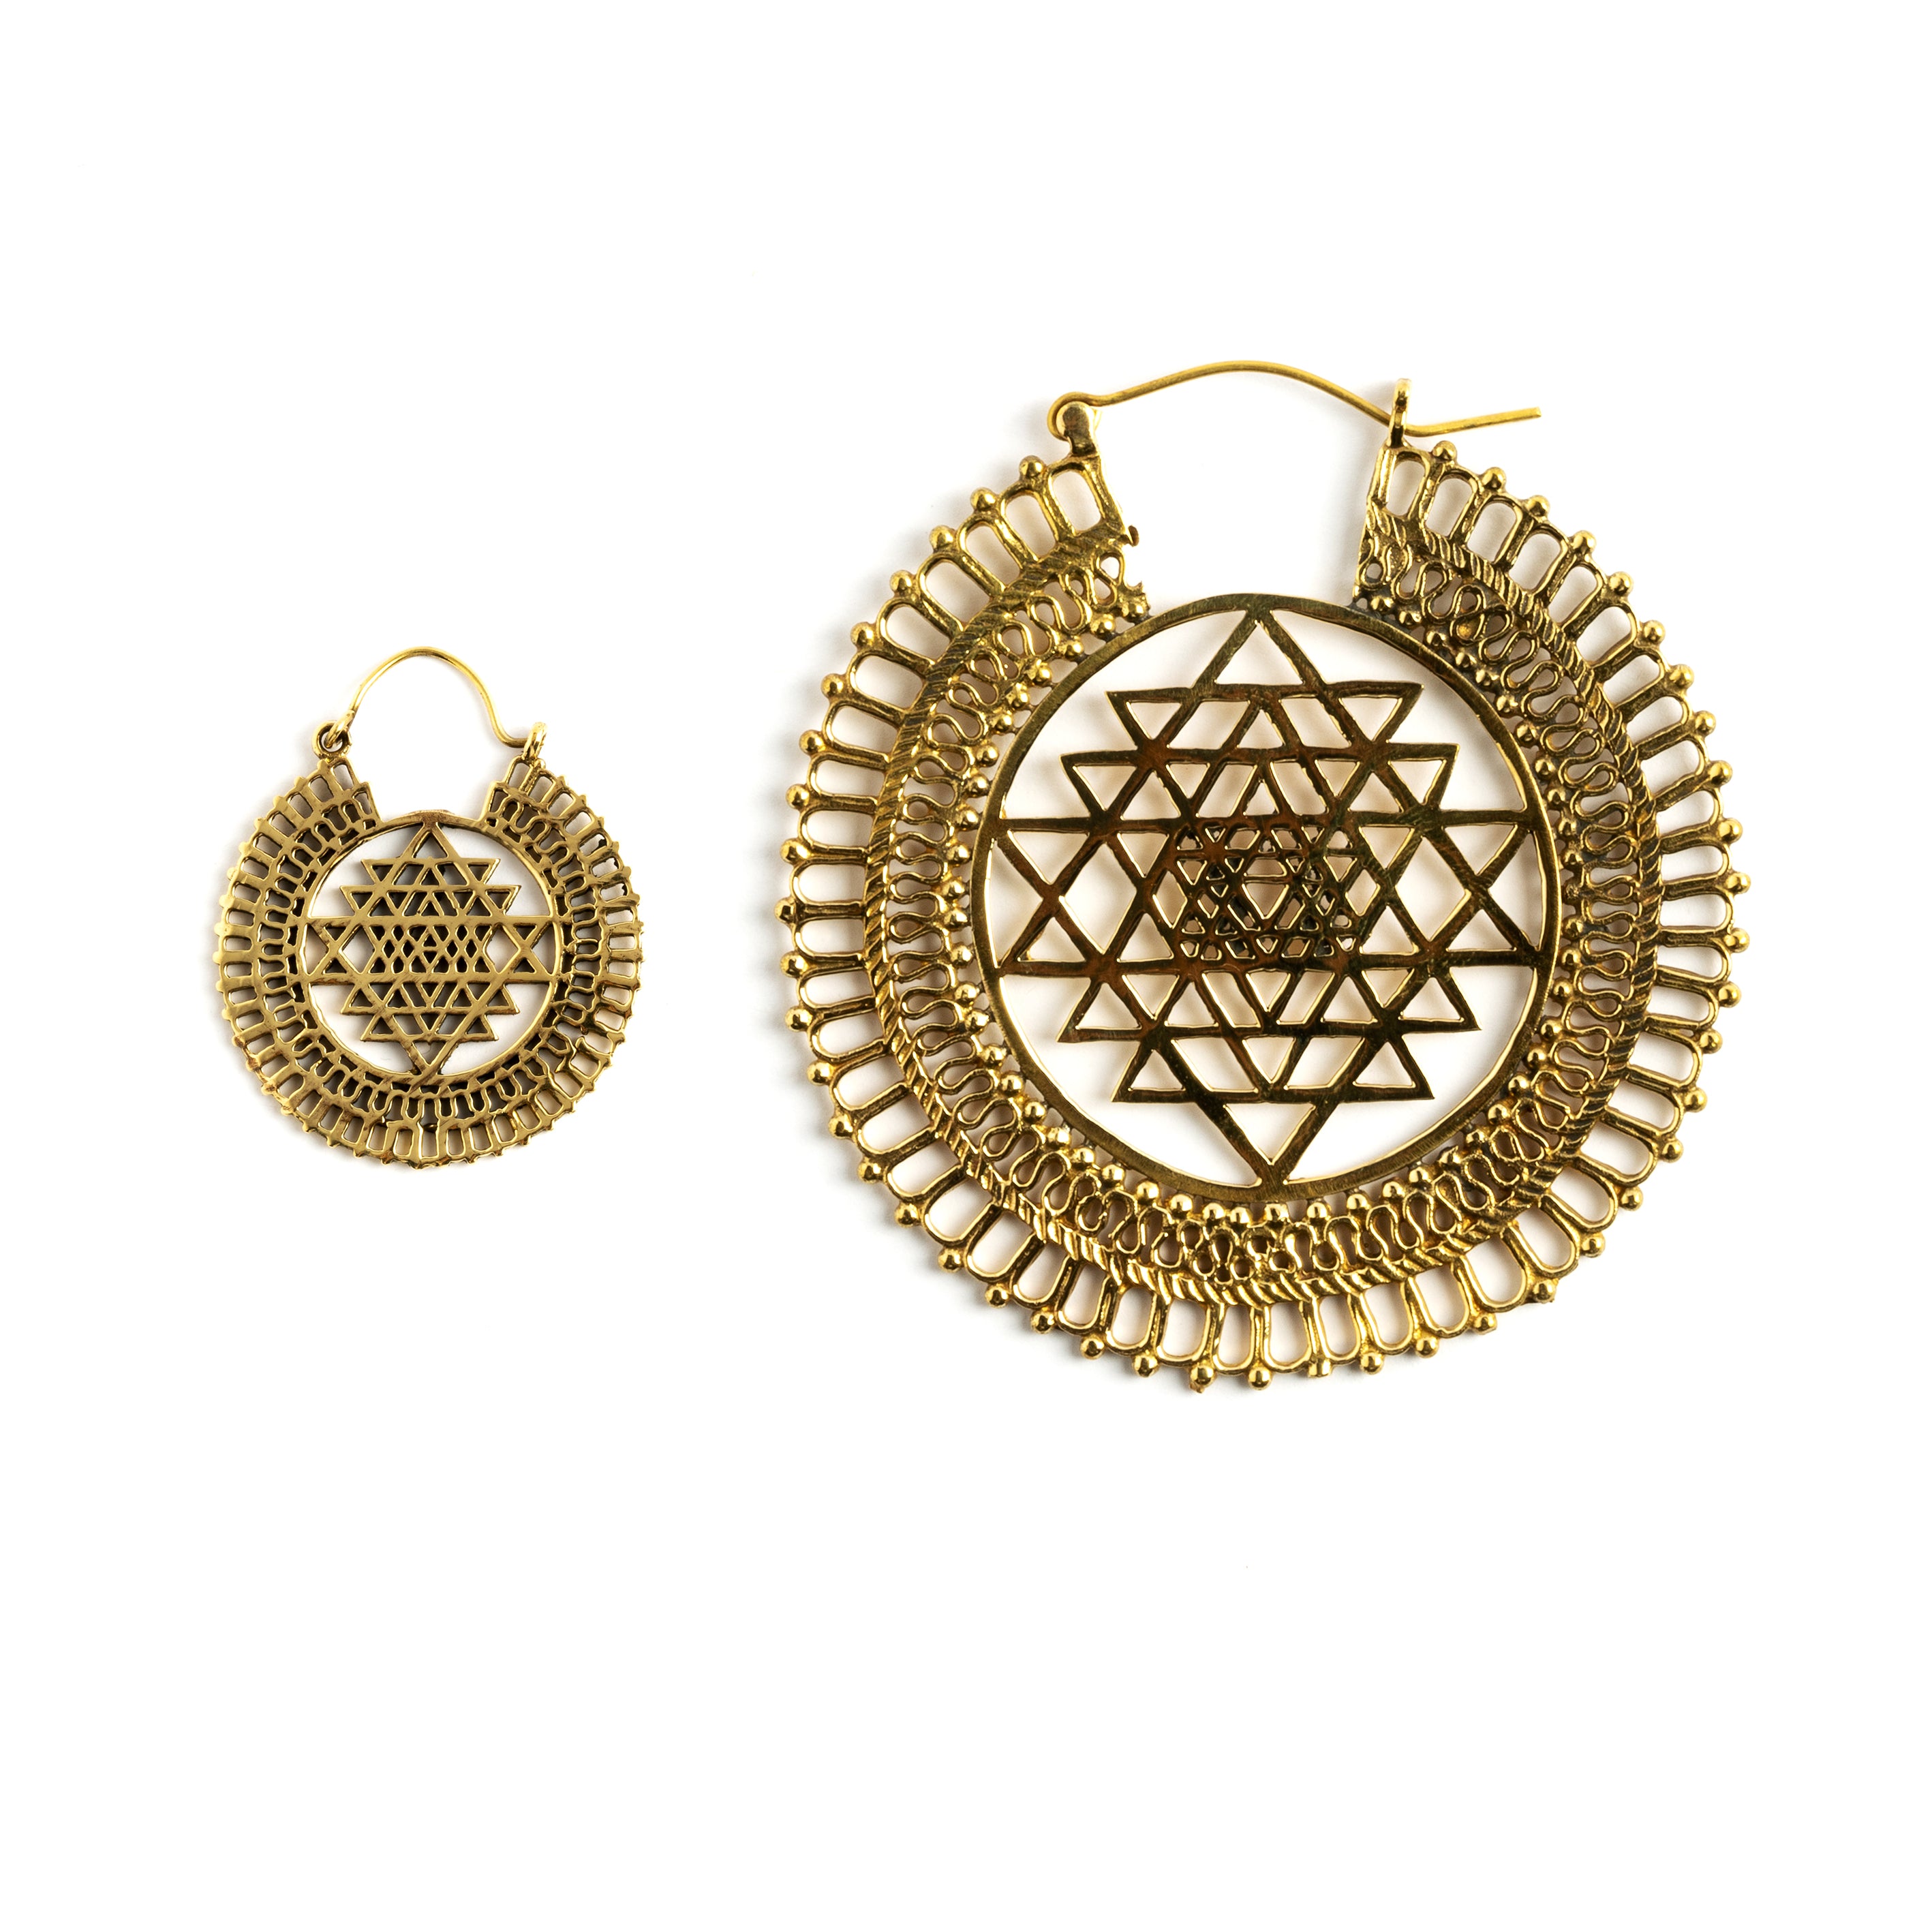 Sri Yantra Brass Hoops small and medium sizes frontal view